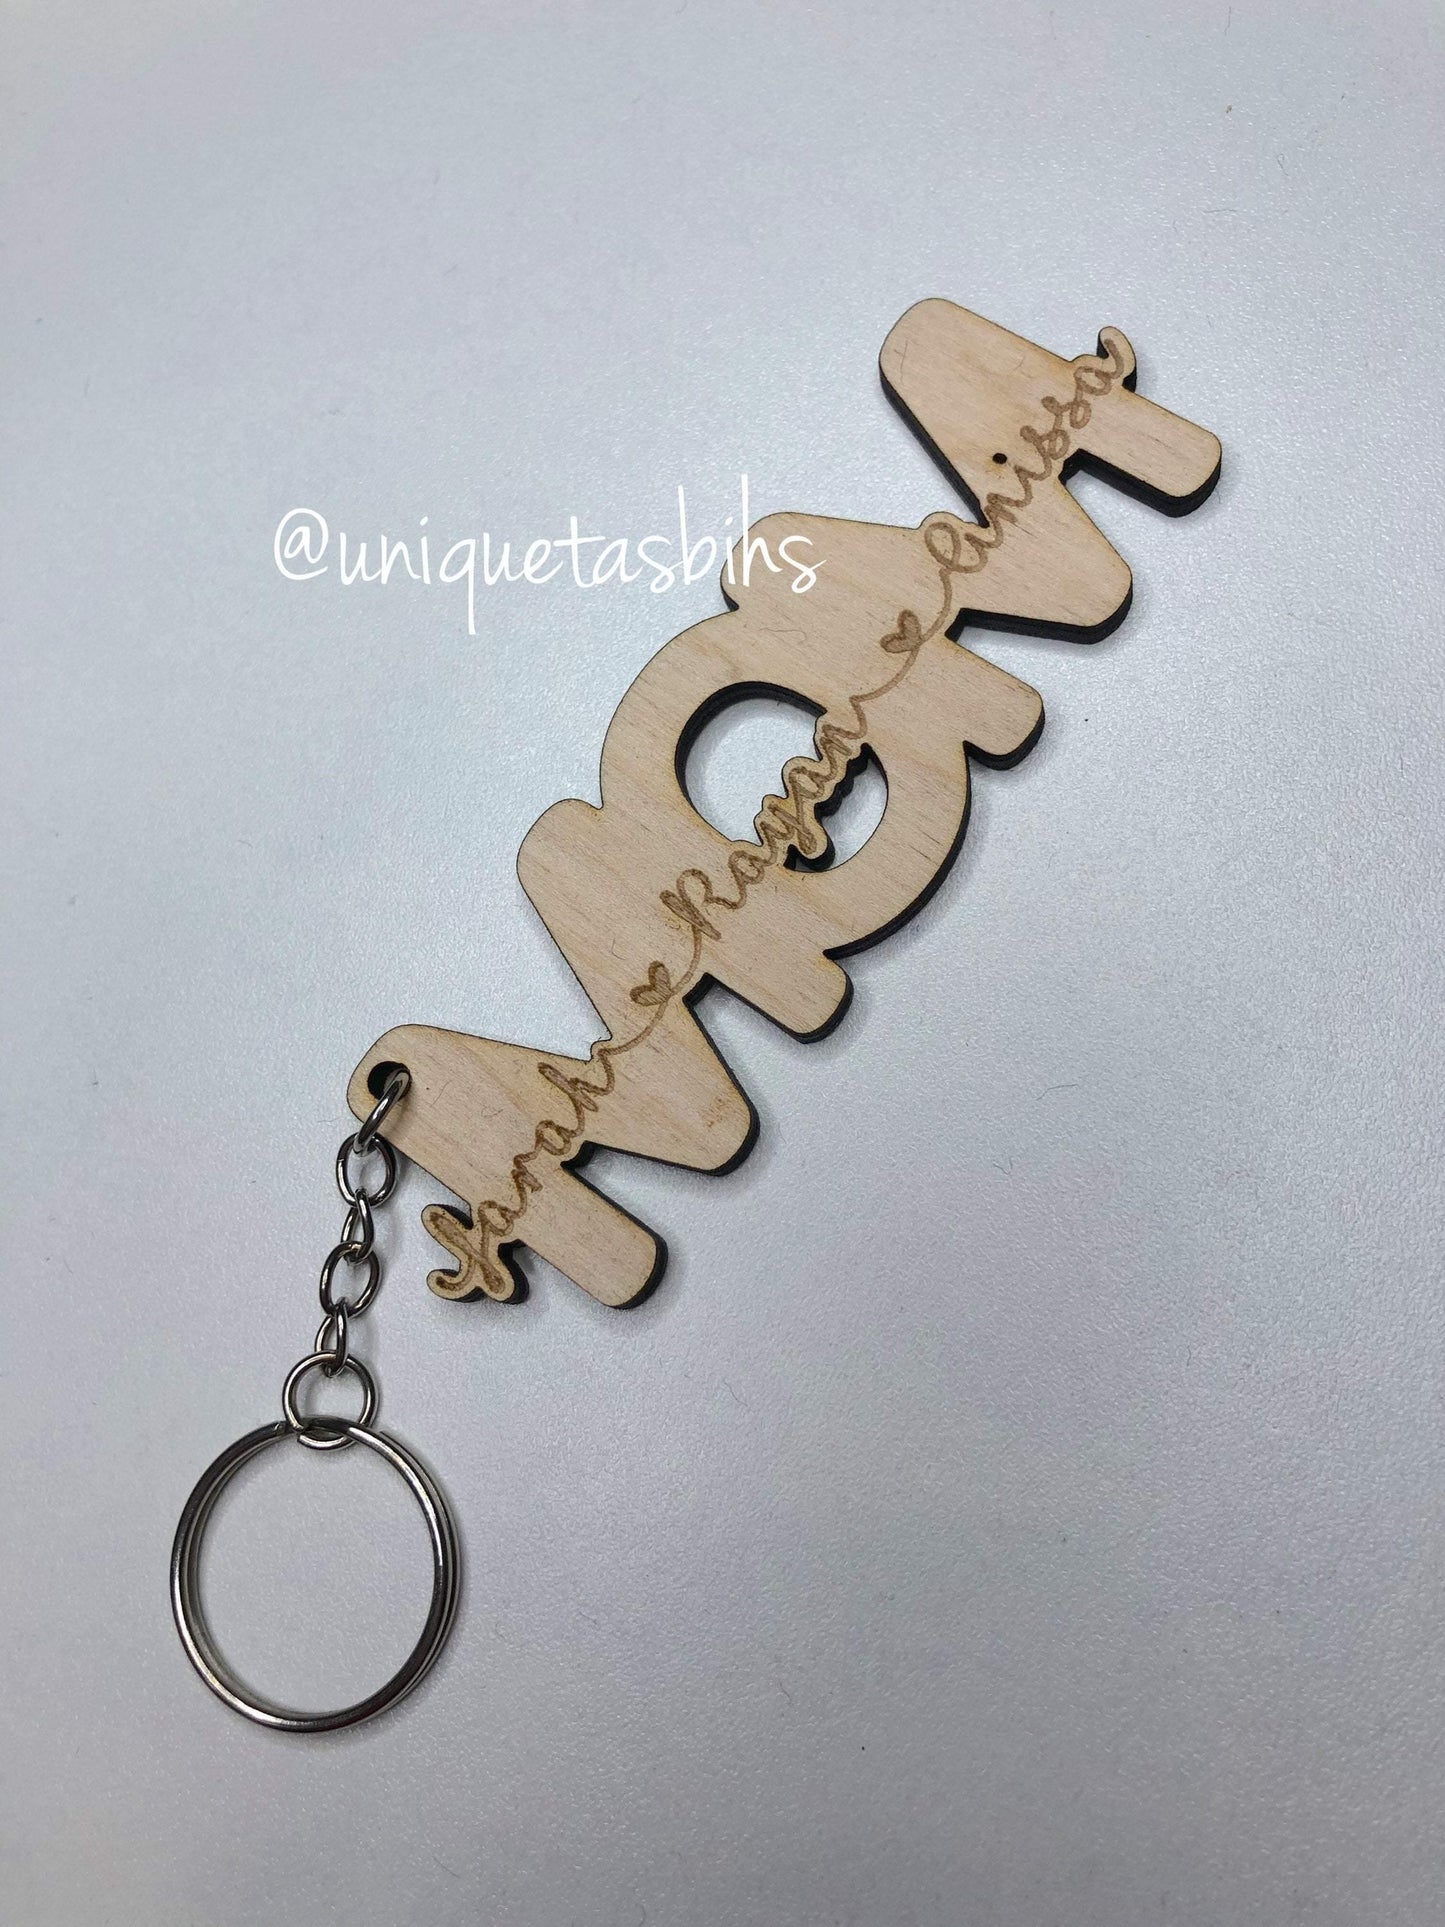 Mom personalised wood keychain - Unique Tasbihs & Gifts